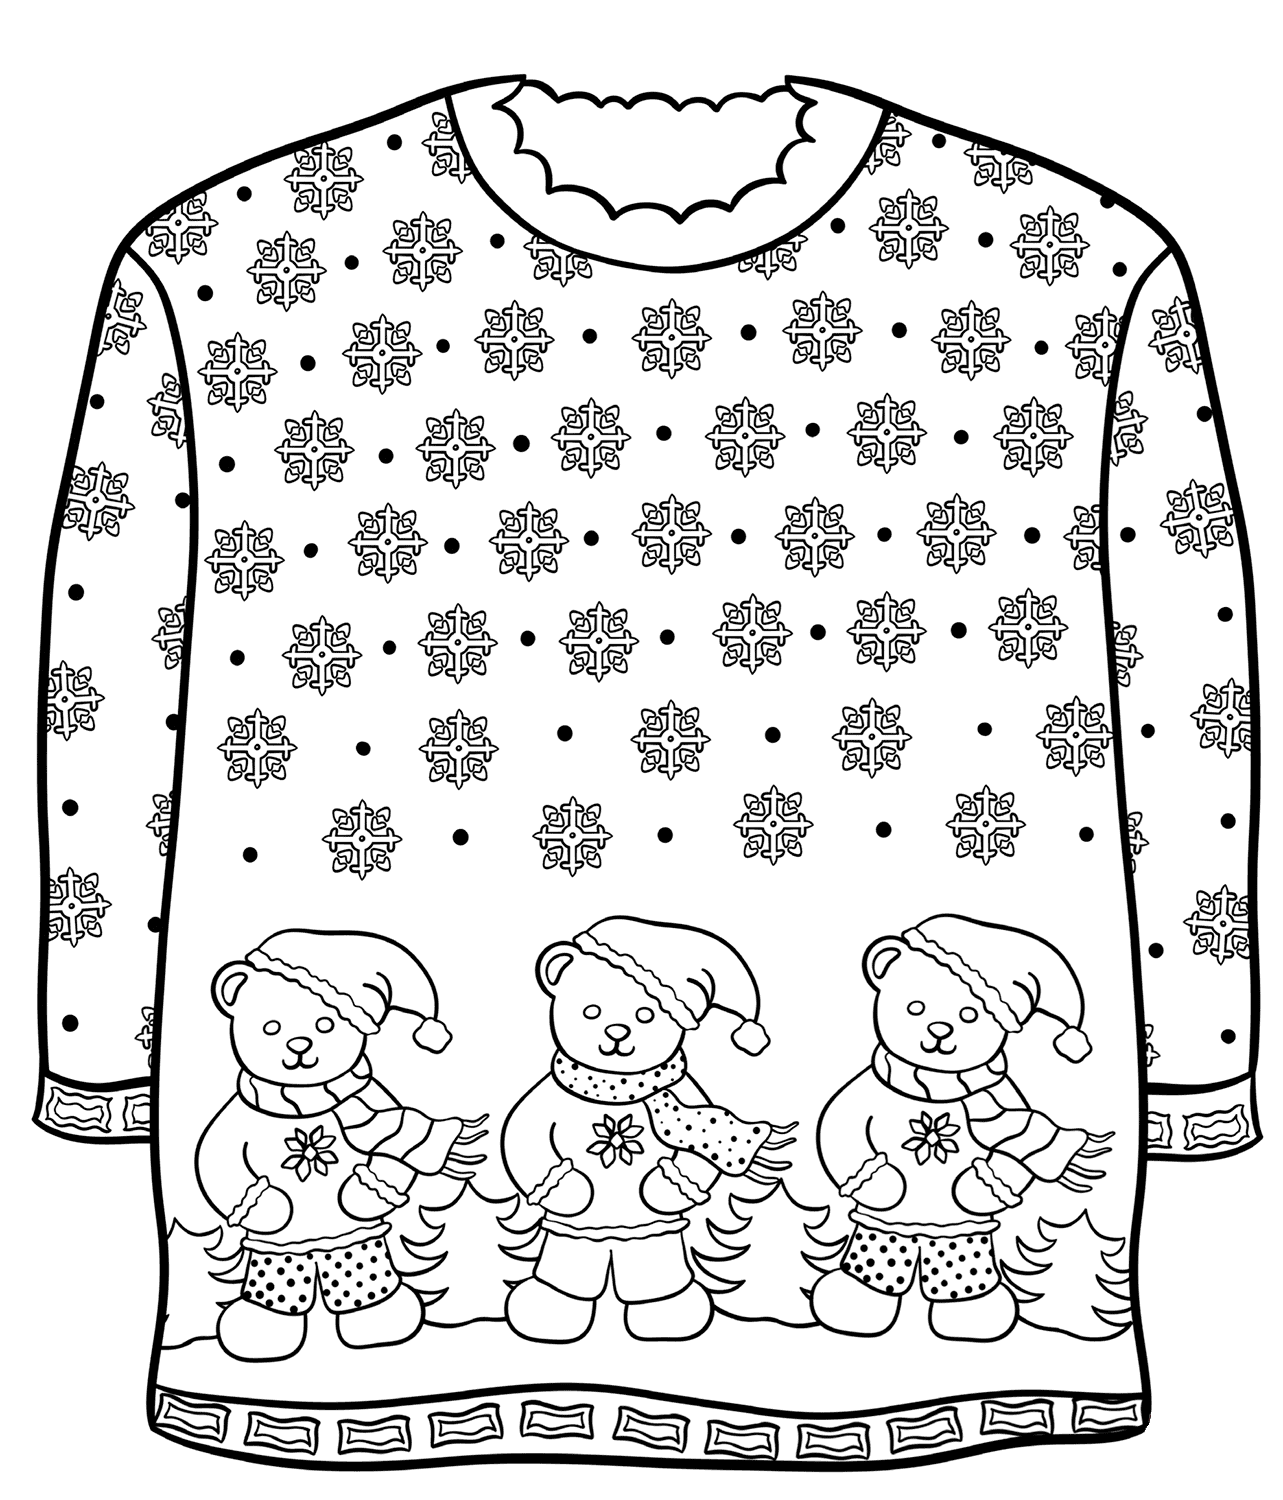 Christmas Sweater with Teddy Bears Coloring Pages